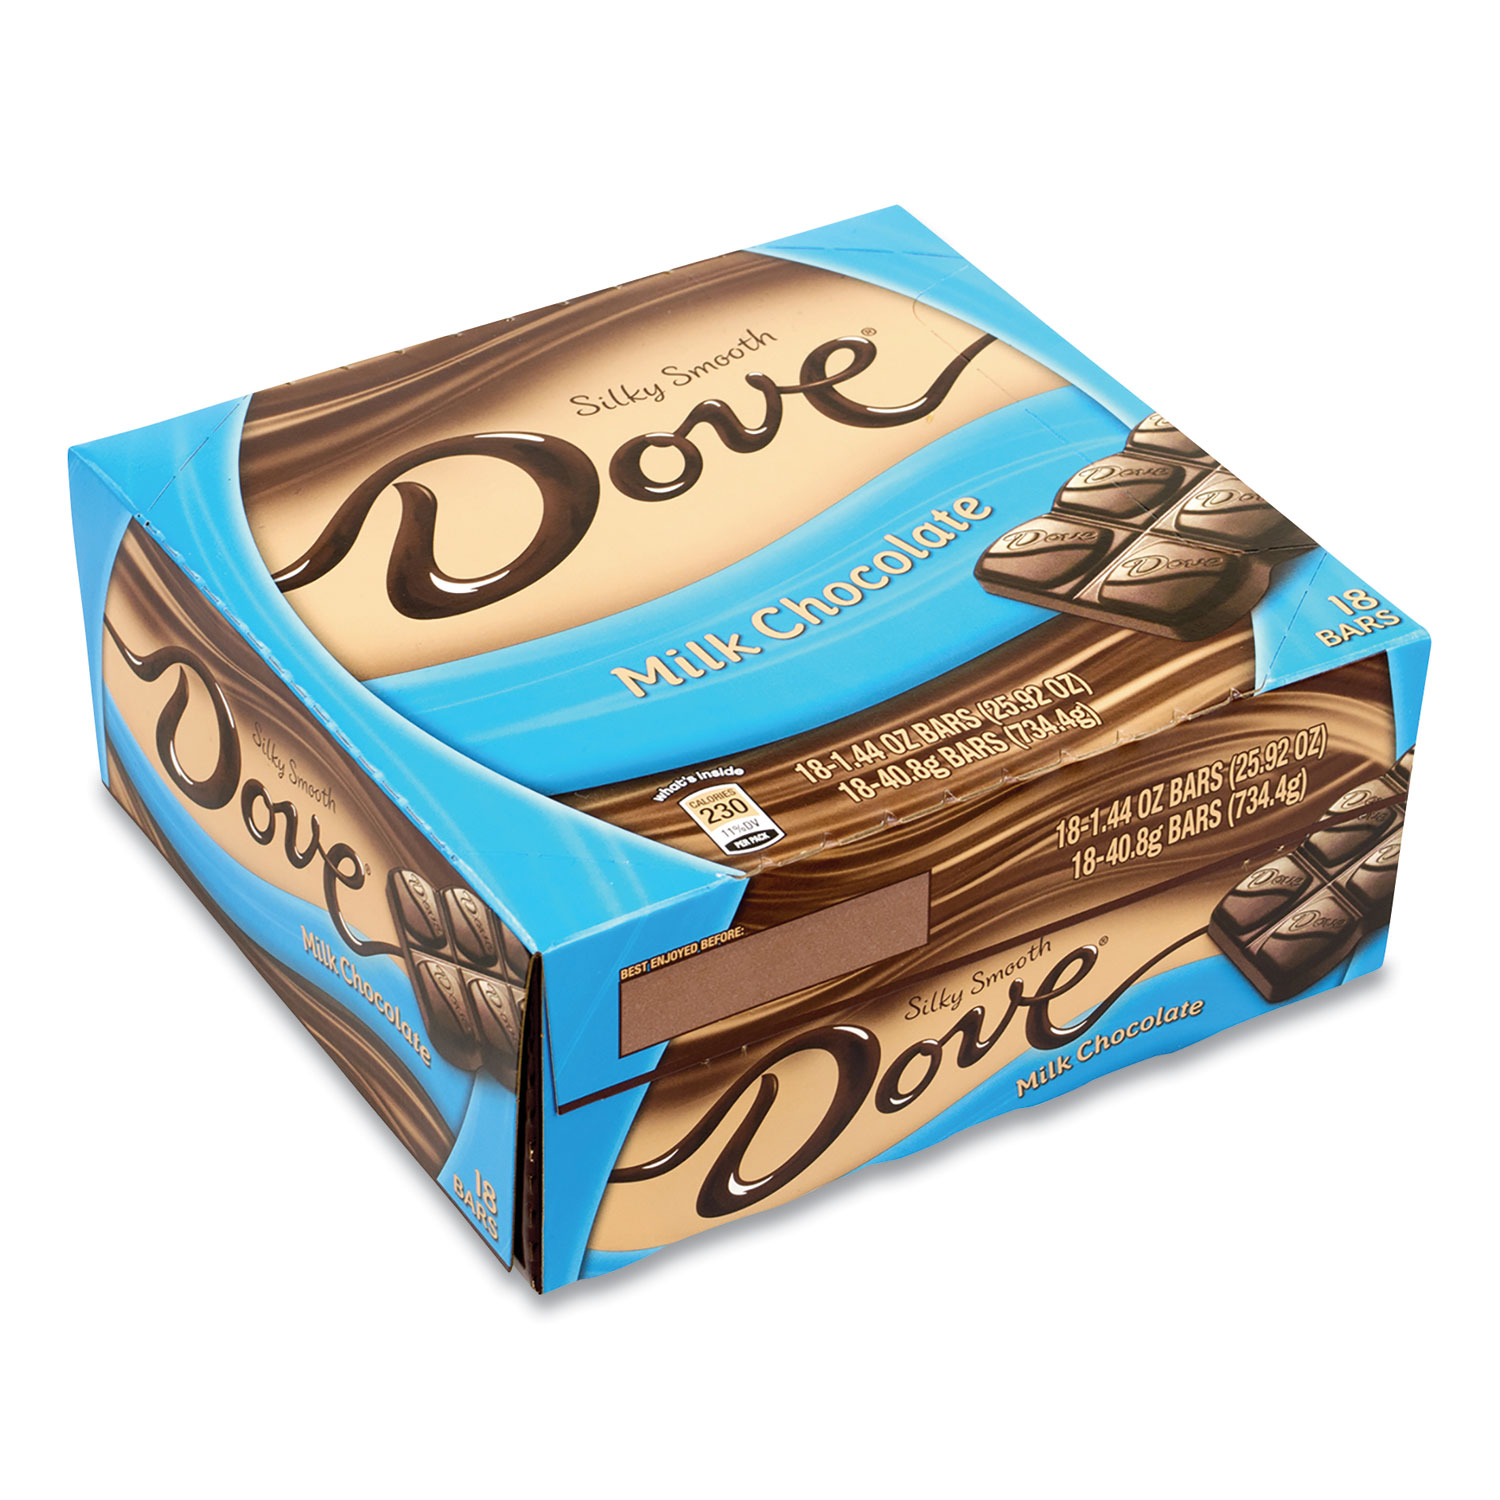  Dove Chocolate 551984 Milk Chocolate Bars, 1.44 oz, 18 Bars/Carton, Free Delivery in 1-4 Business Days (GRR20900468) 